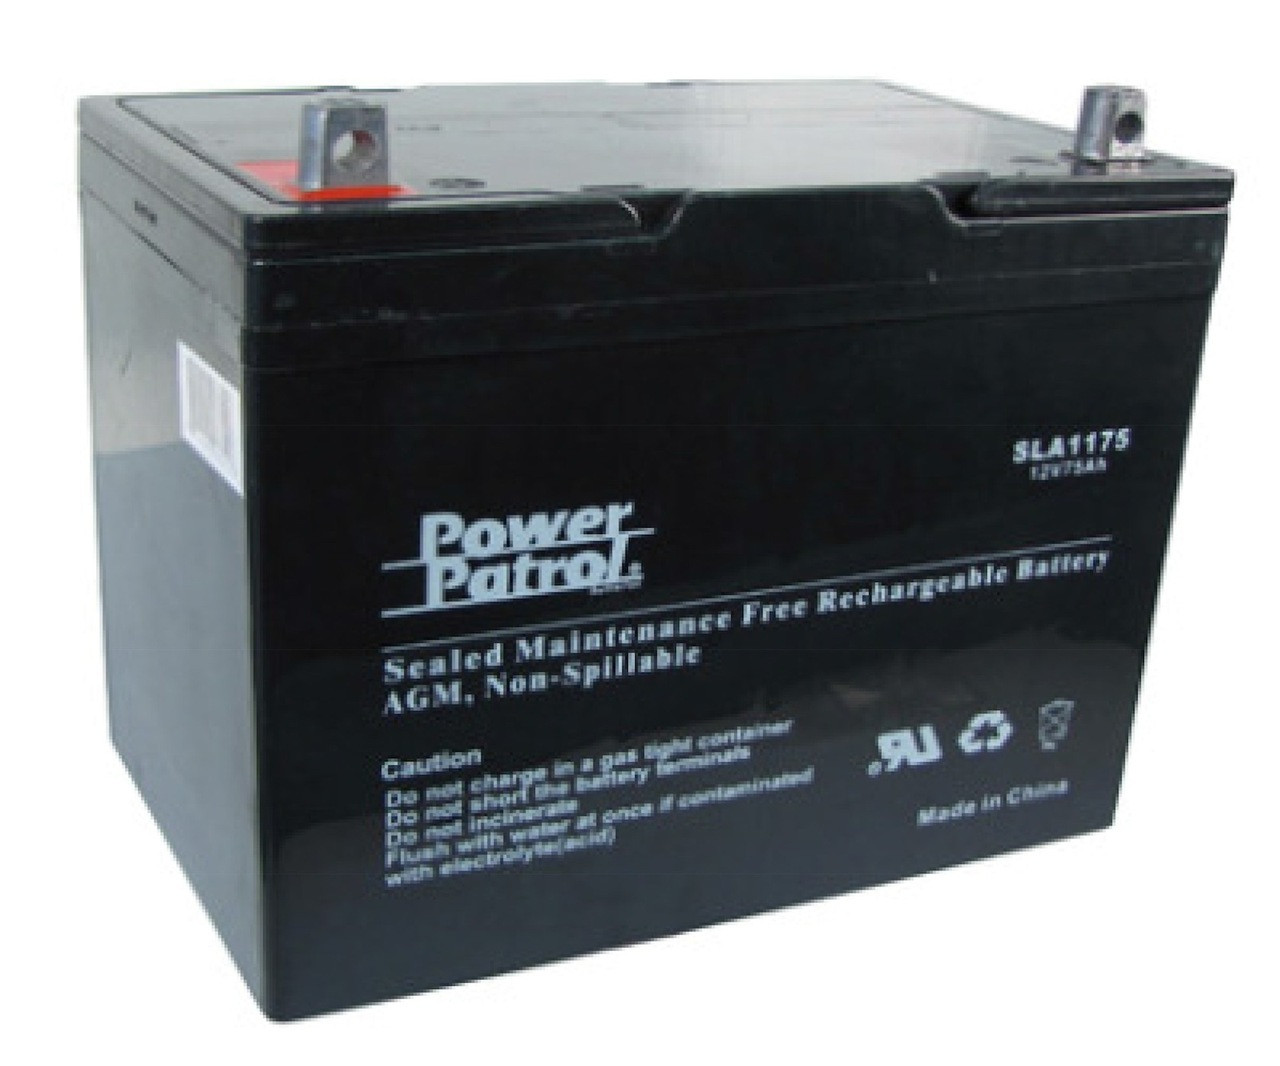 who makes interstate marine batteries